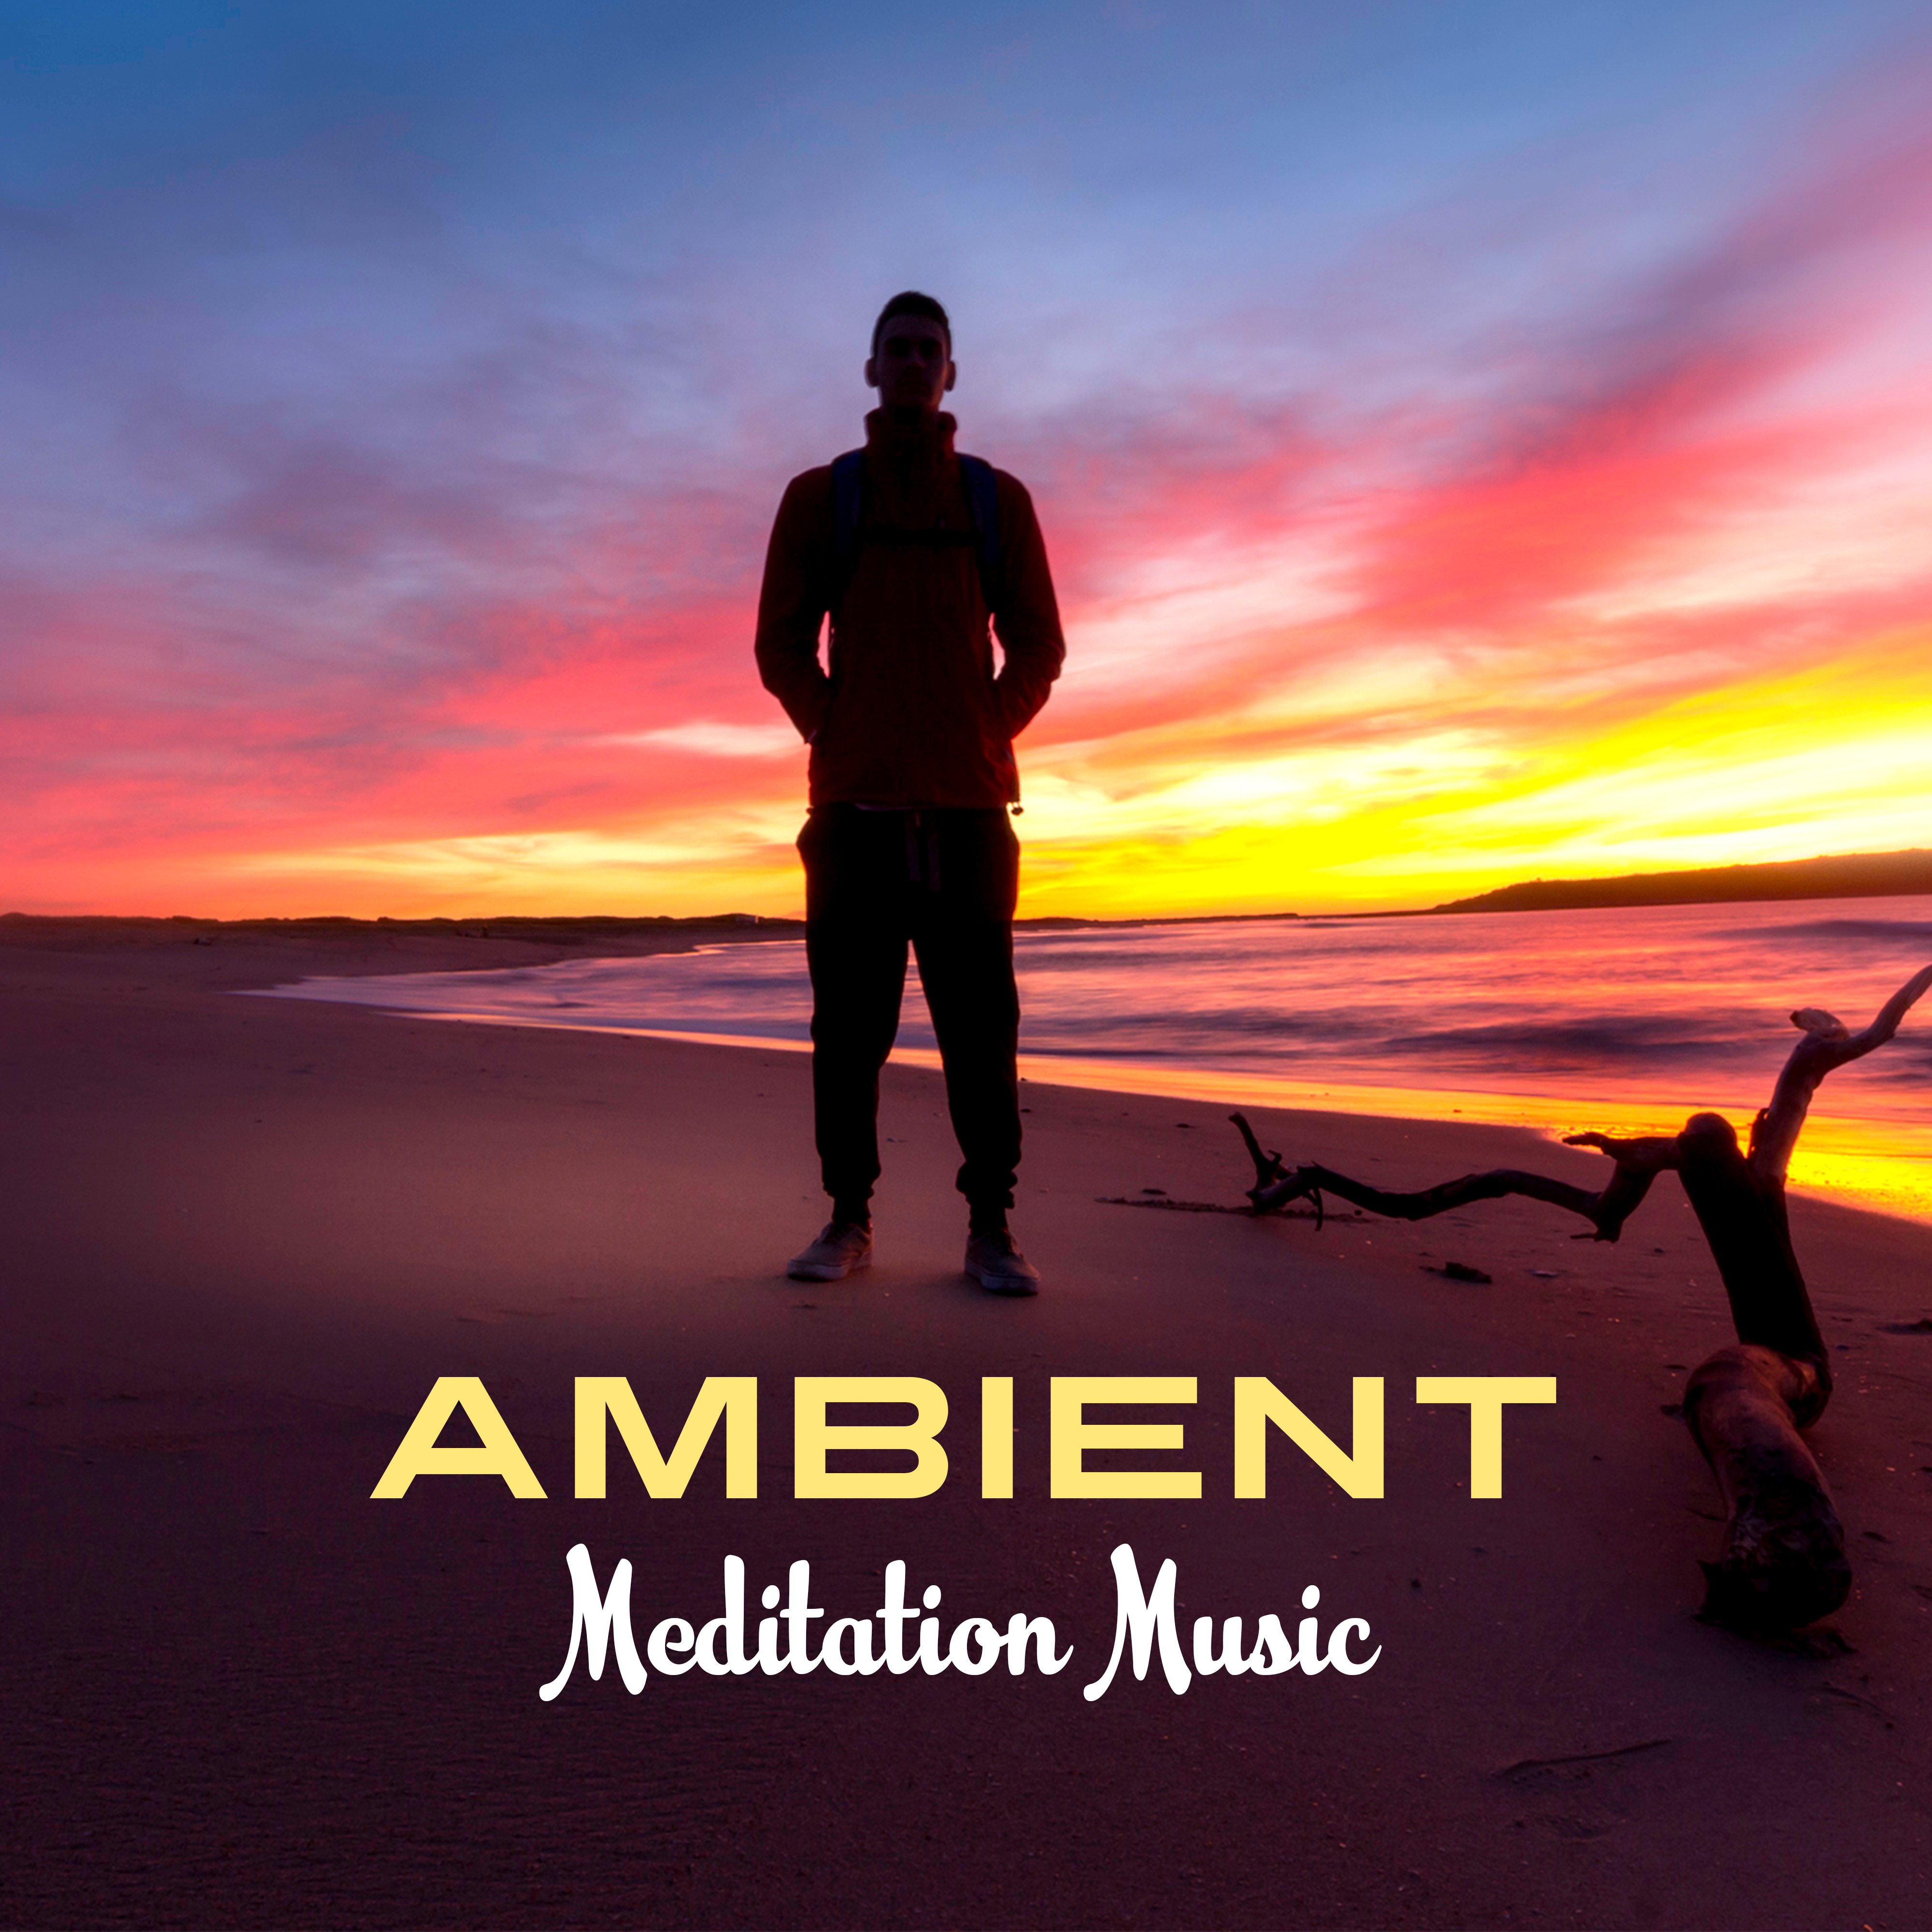 Ambient Meditation Music  Calm Sounds to Meditate, Peaceful Songs, New Age Meditation Tracks, Buddha Lounge